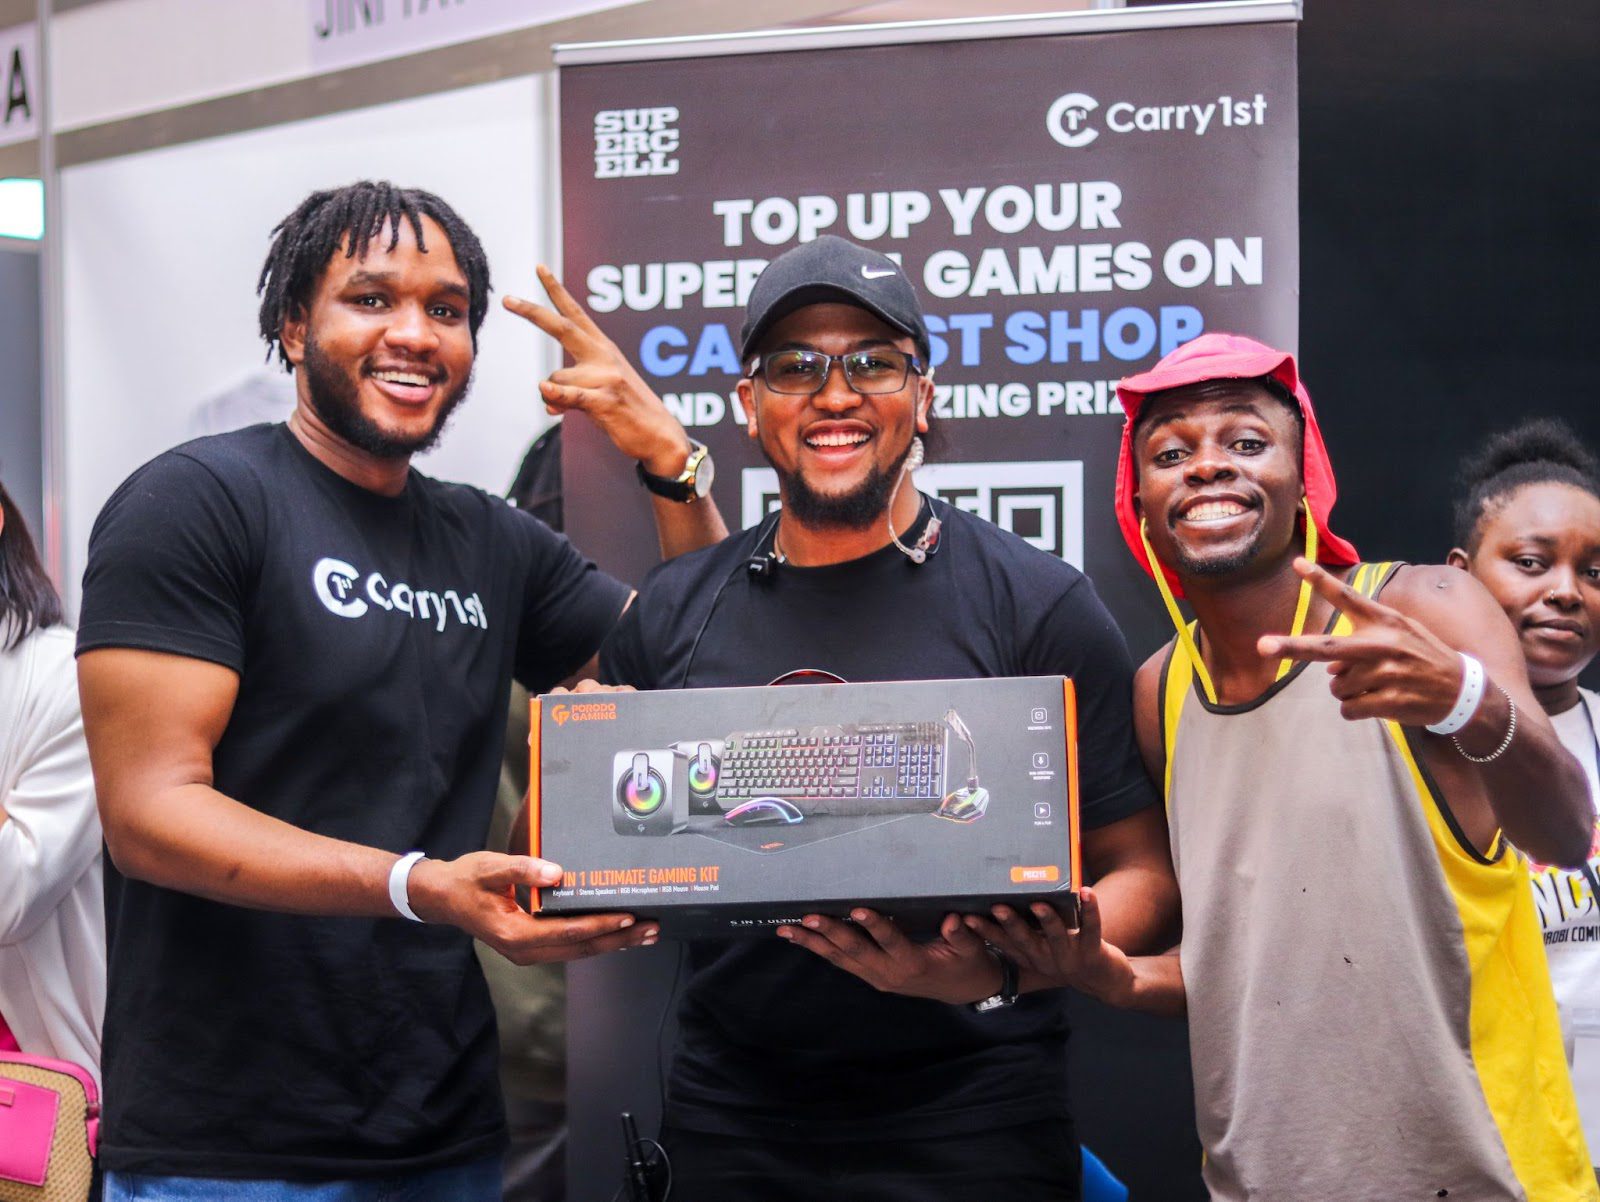 Dominion Eromosele presents a prize to a lucky gamer